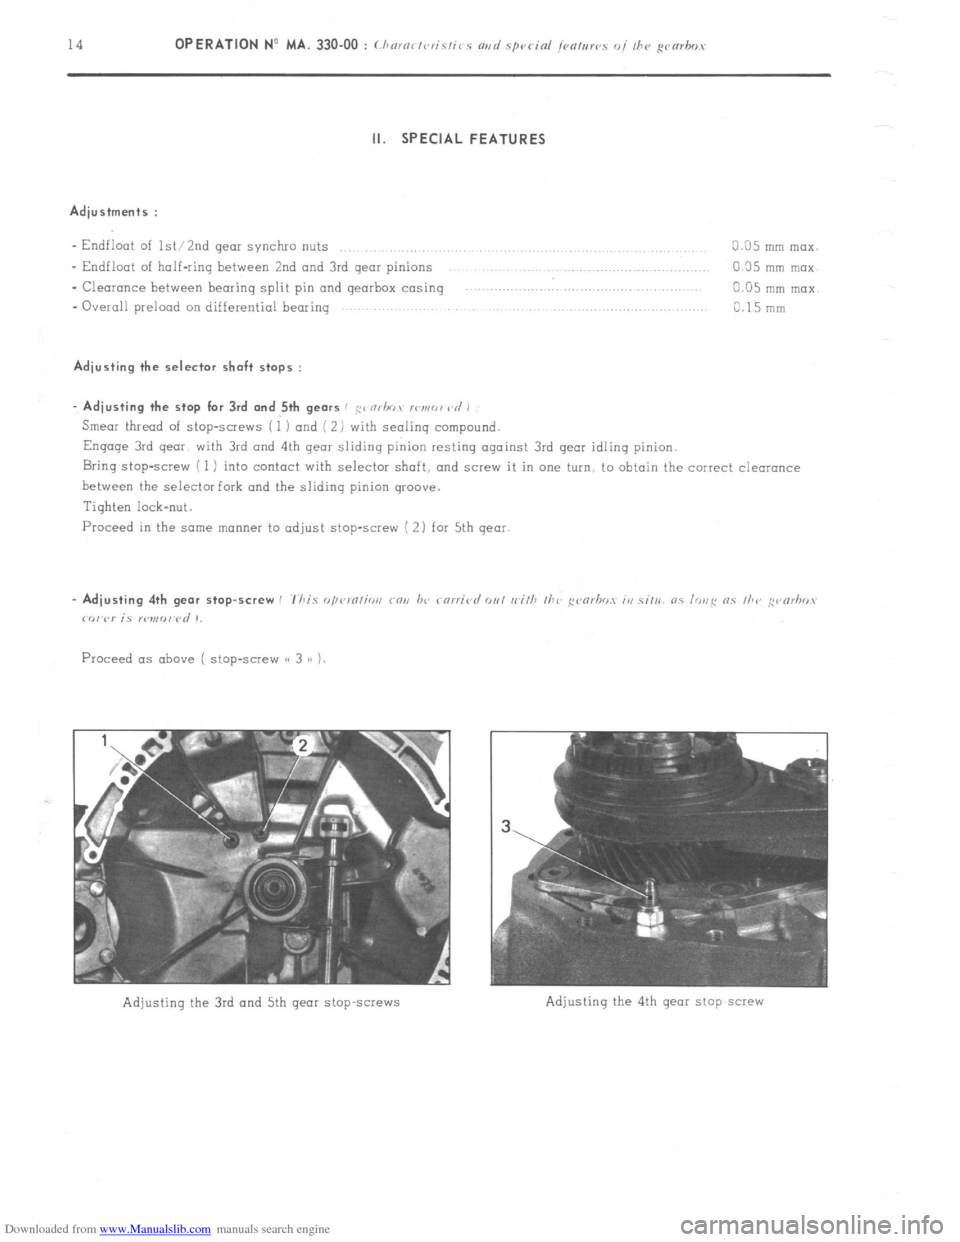 Citroen CX 1974 1.G Workshop Manual Downloaded from www.Manualslib.com manuals search engine ii. SPECIAL FEATURES 
Adjustments : 
- Endfloat of lW2nd gear synchio nuts 
0.05 mm max. 
- Endfloot of half-ring between 2nd and 3rd gear pini